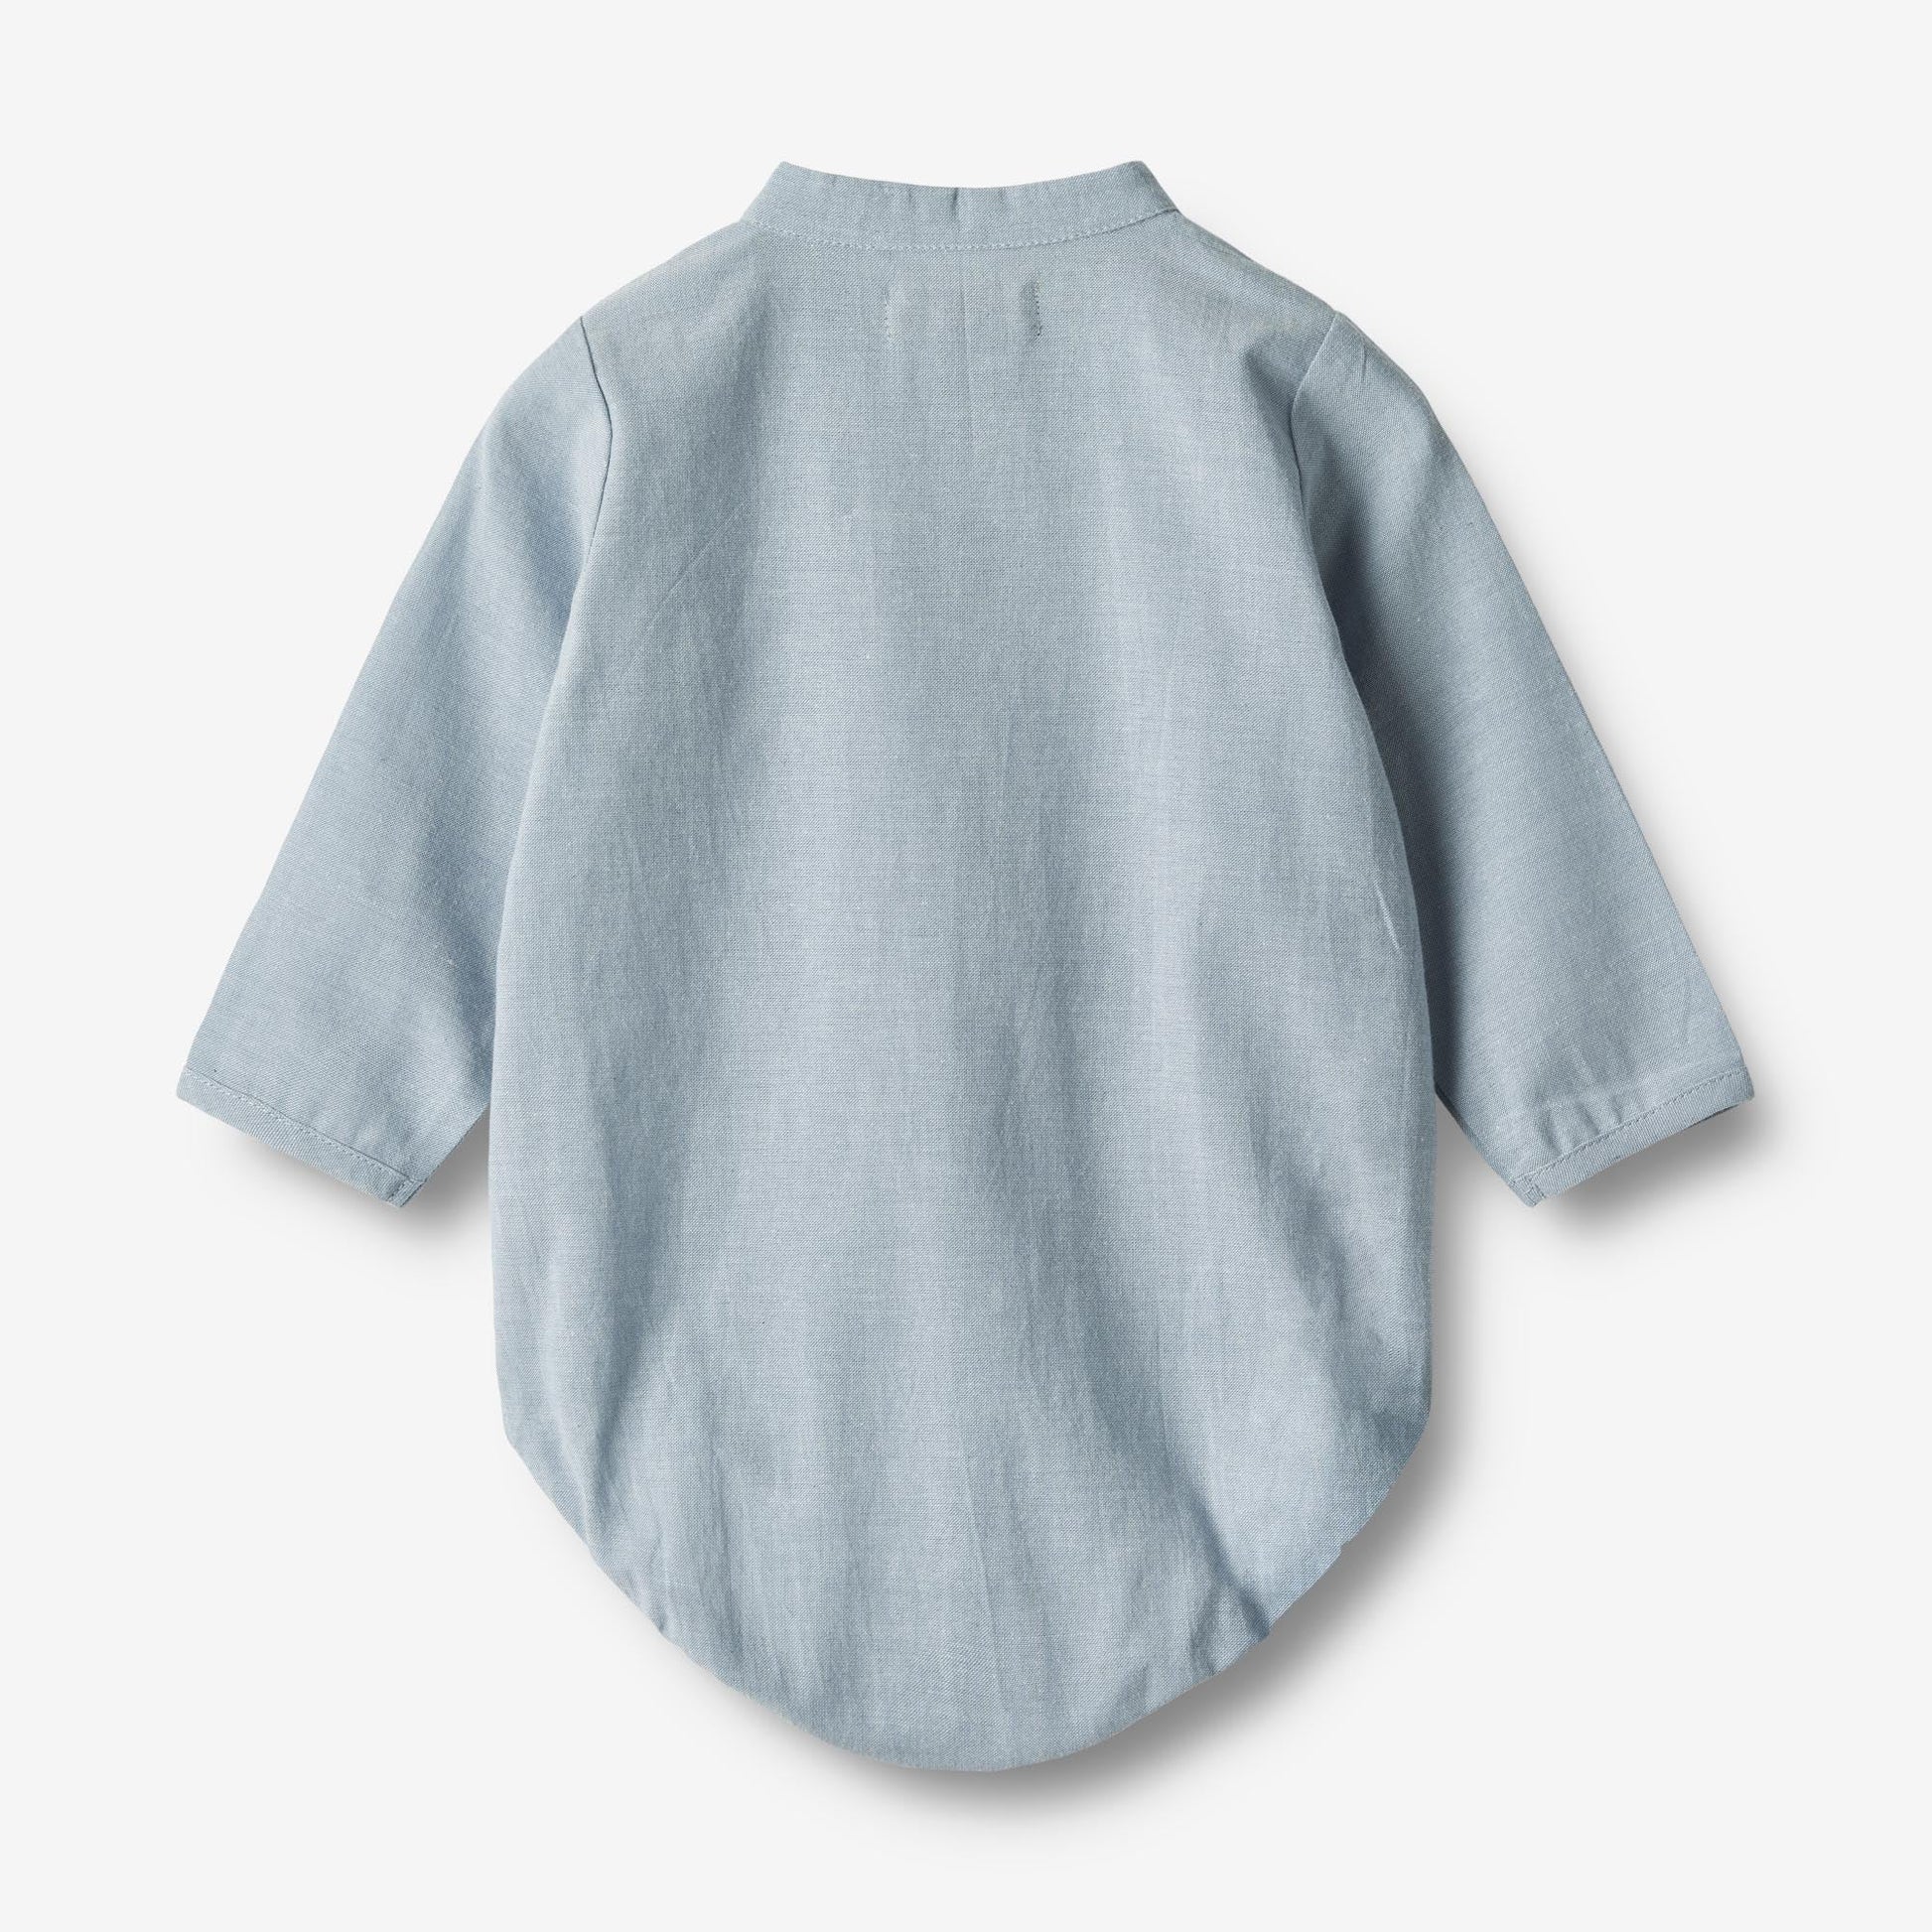 Wheat 'Victor' Baby Romper Shirt - Blue Waves